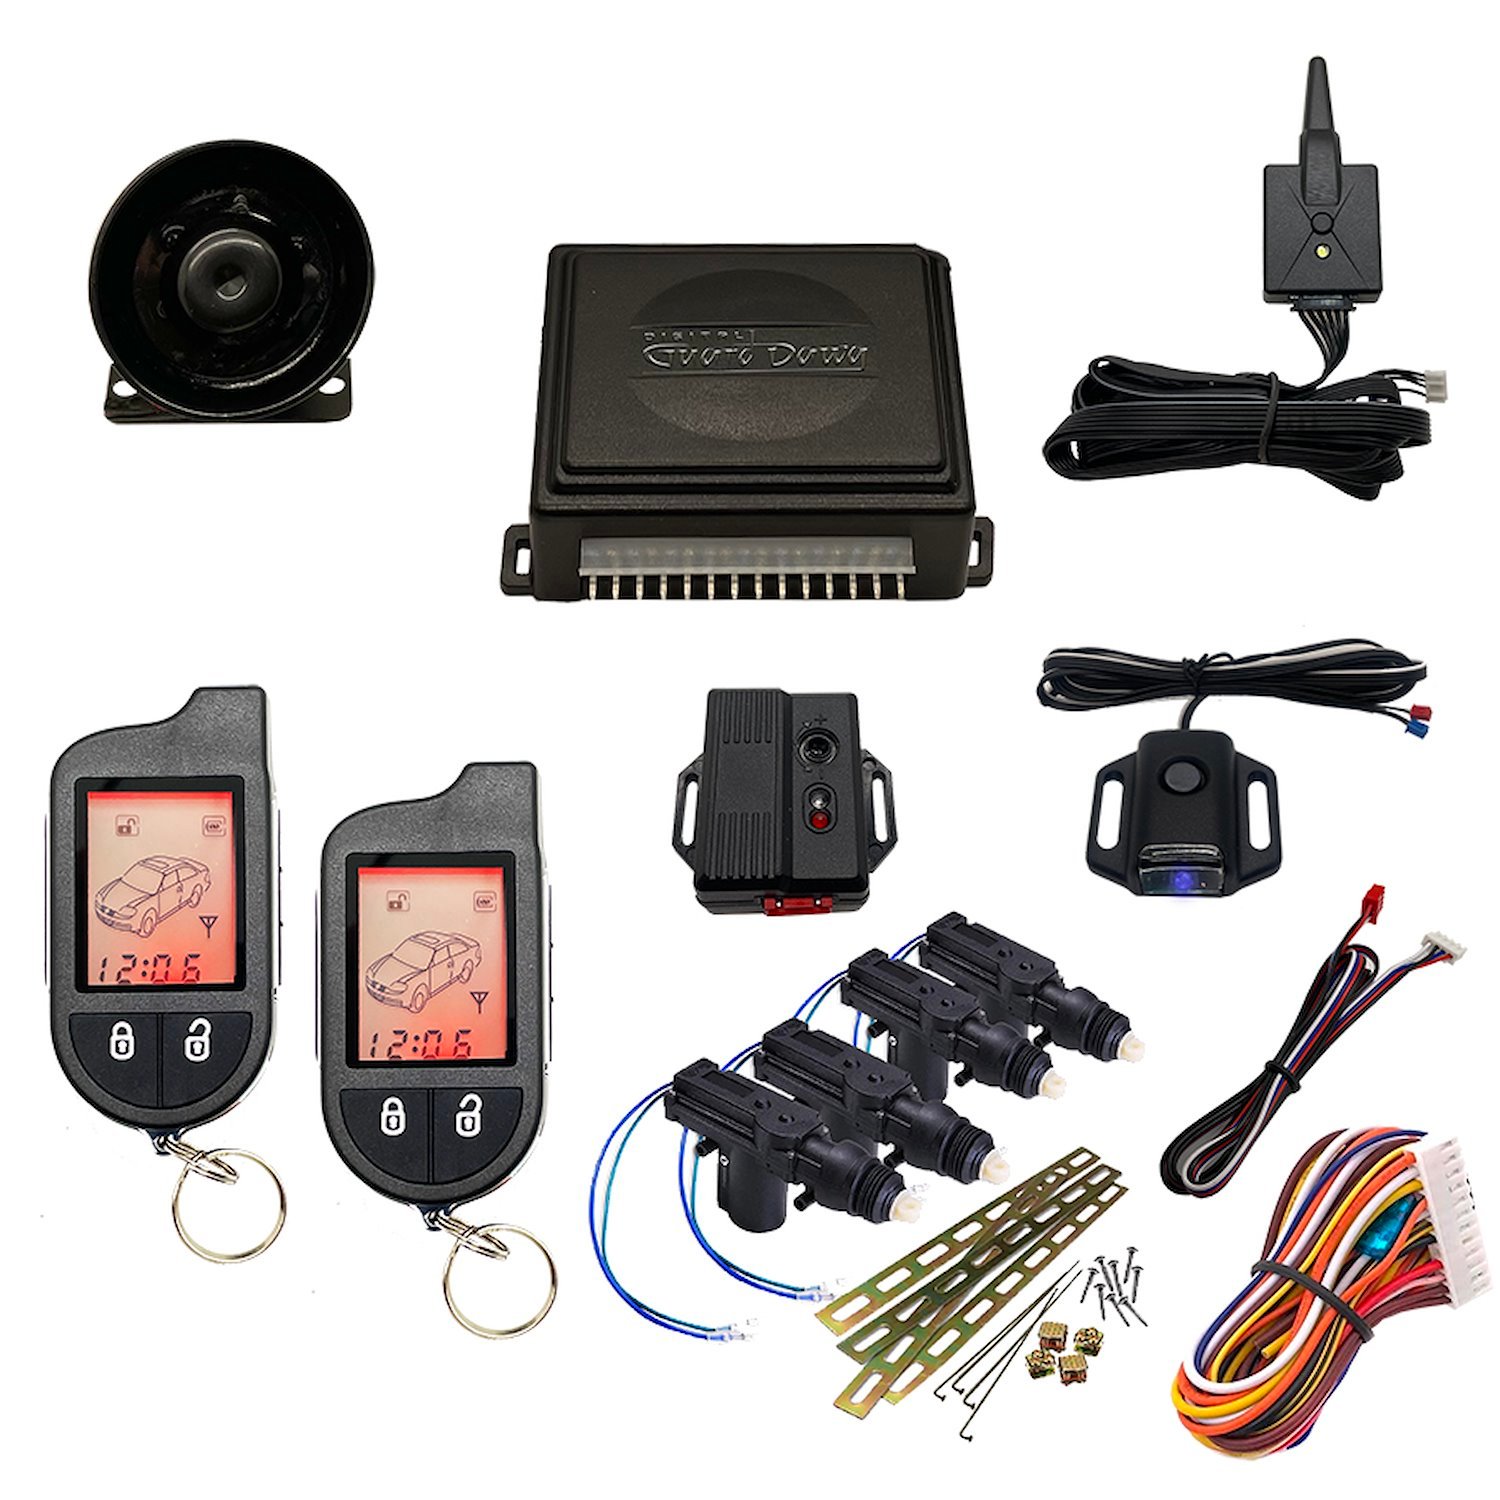 DGD-KY-ALM-2-4A Keyless Entry and Alarm System, 2-Way w/4-Door Actuator Kit